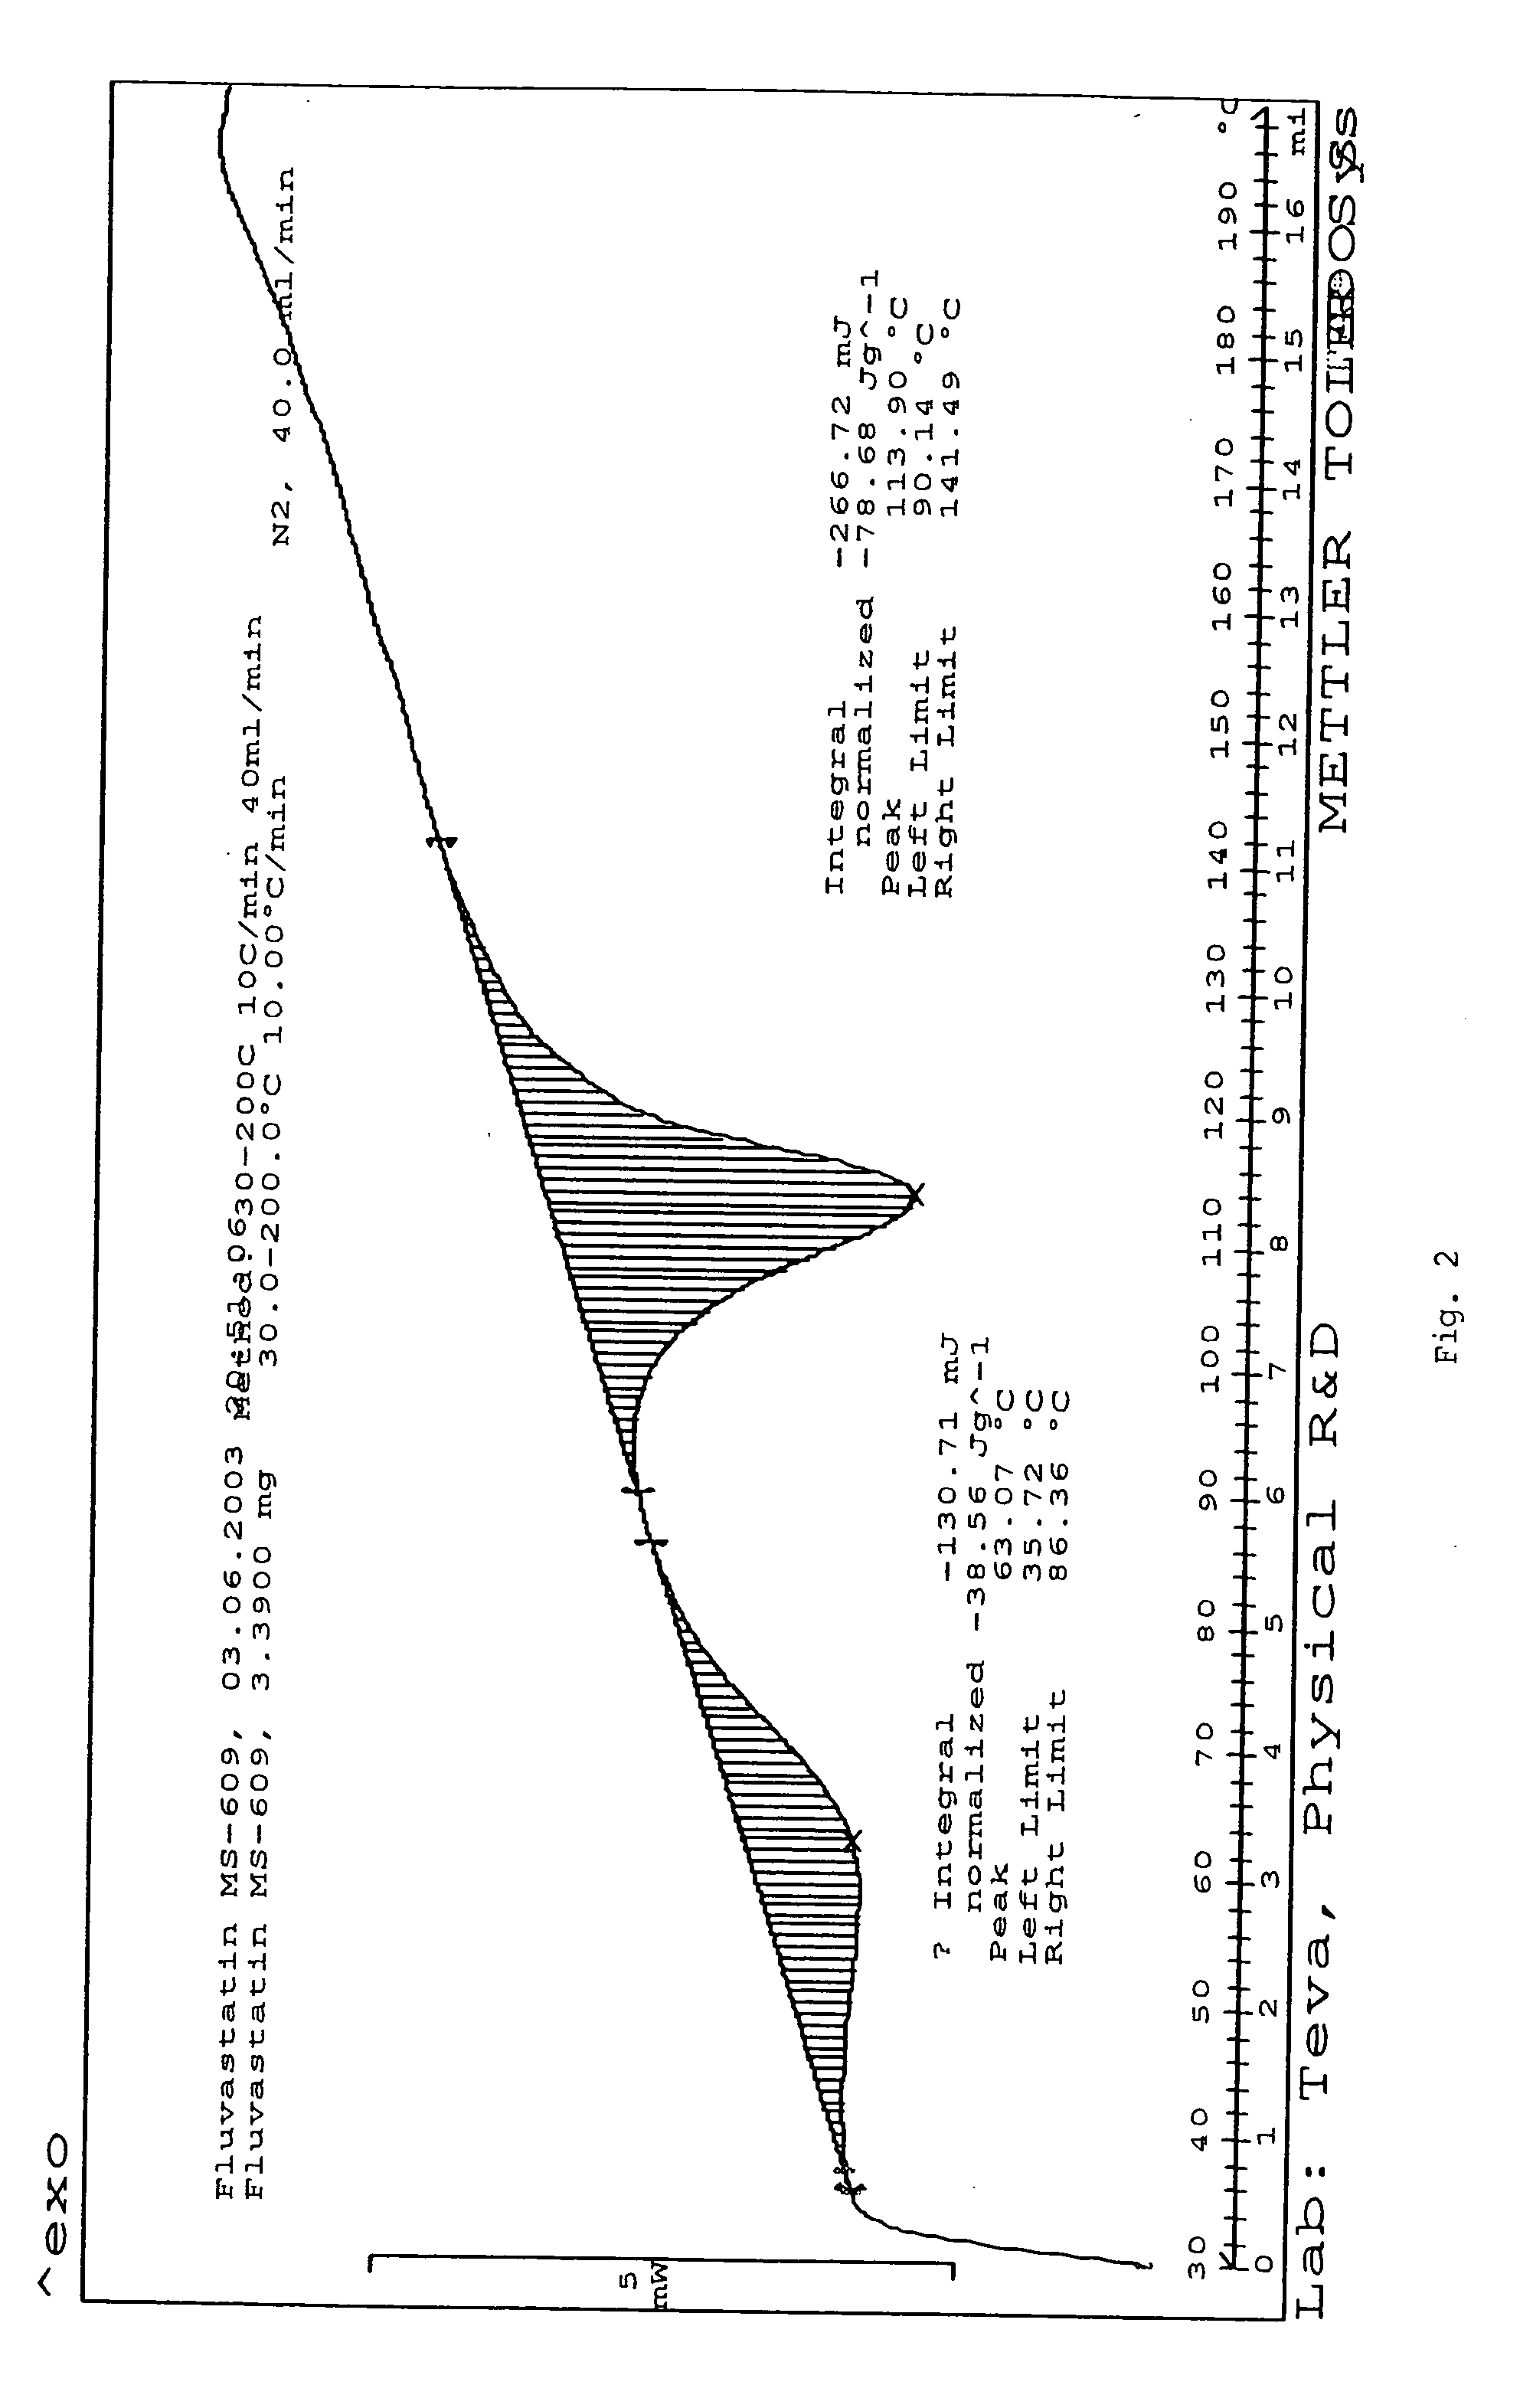 Fluvastatin sodium crystal forms XIV, LXXIII, LXXIX, LXXX and LXXXVII, processes for preparing them, compositions containing them and methods of using them